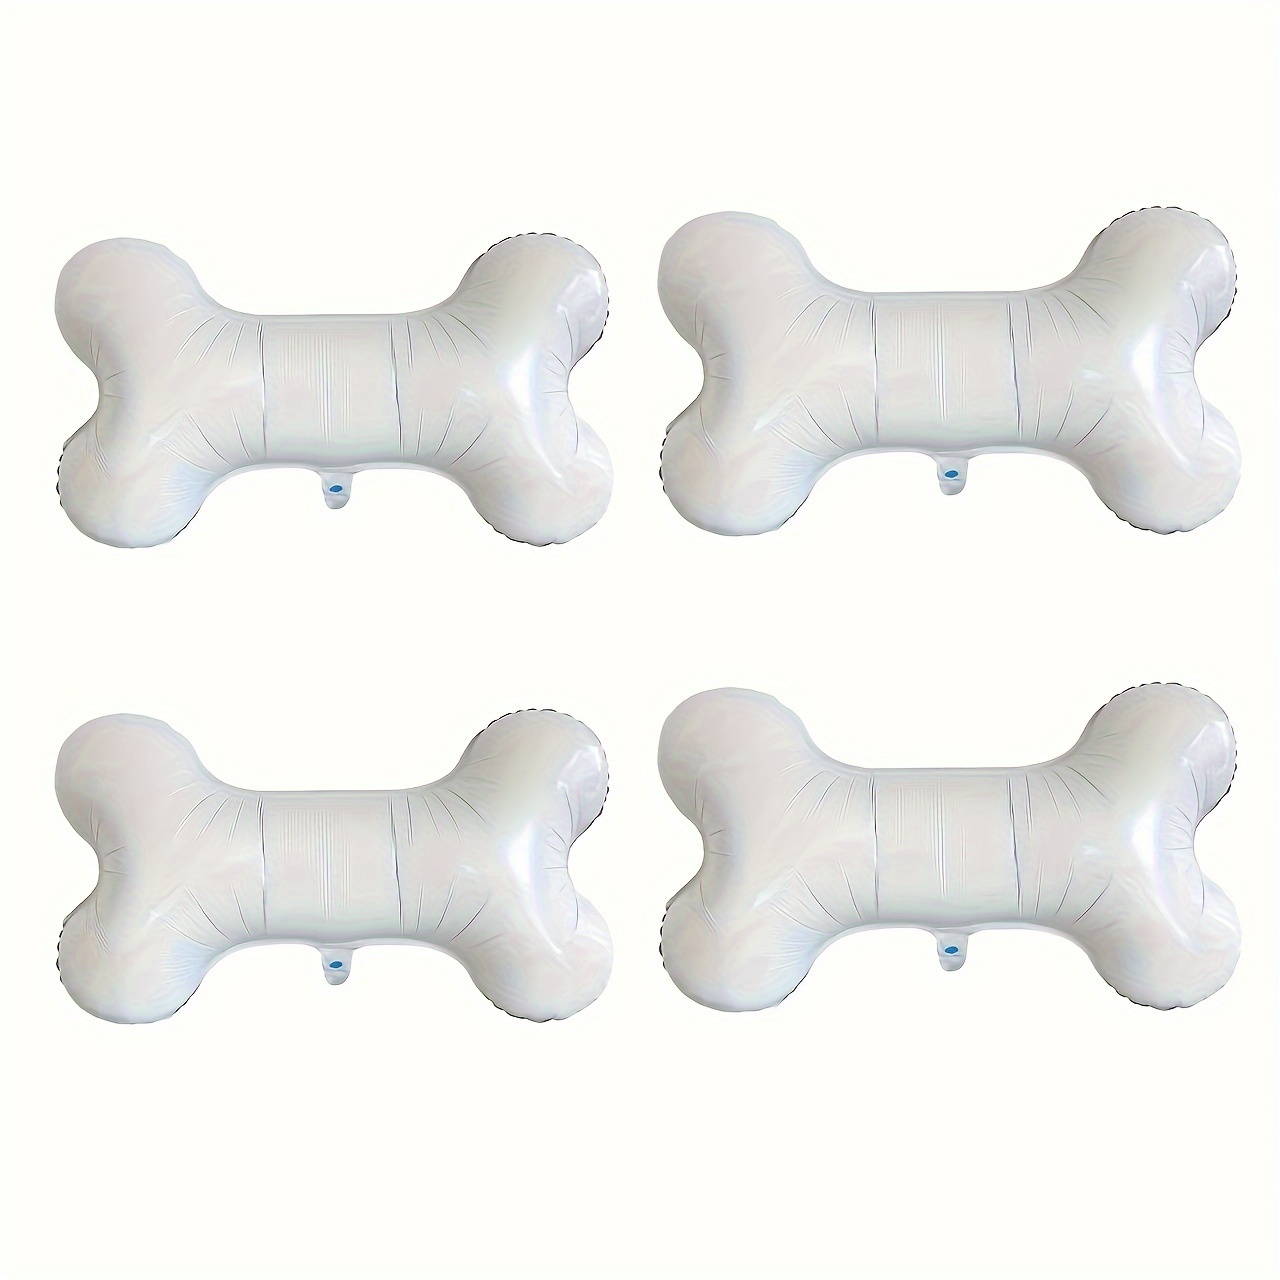 

4pcs, Cute 29.1 Inch Aluminum Dog Bone Balloons For Pet Birthday Party Decorations - Perfect For Dog Lovers And Dog Owners